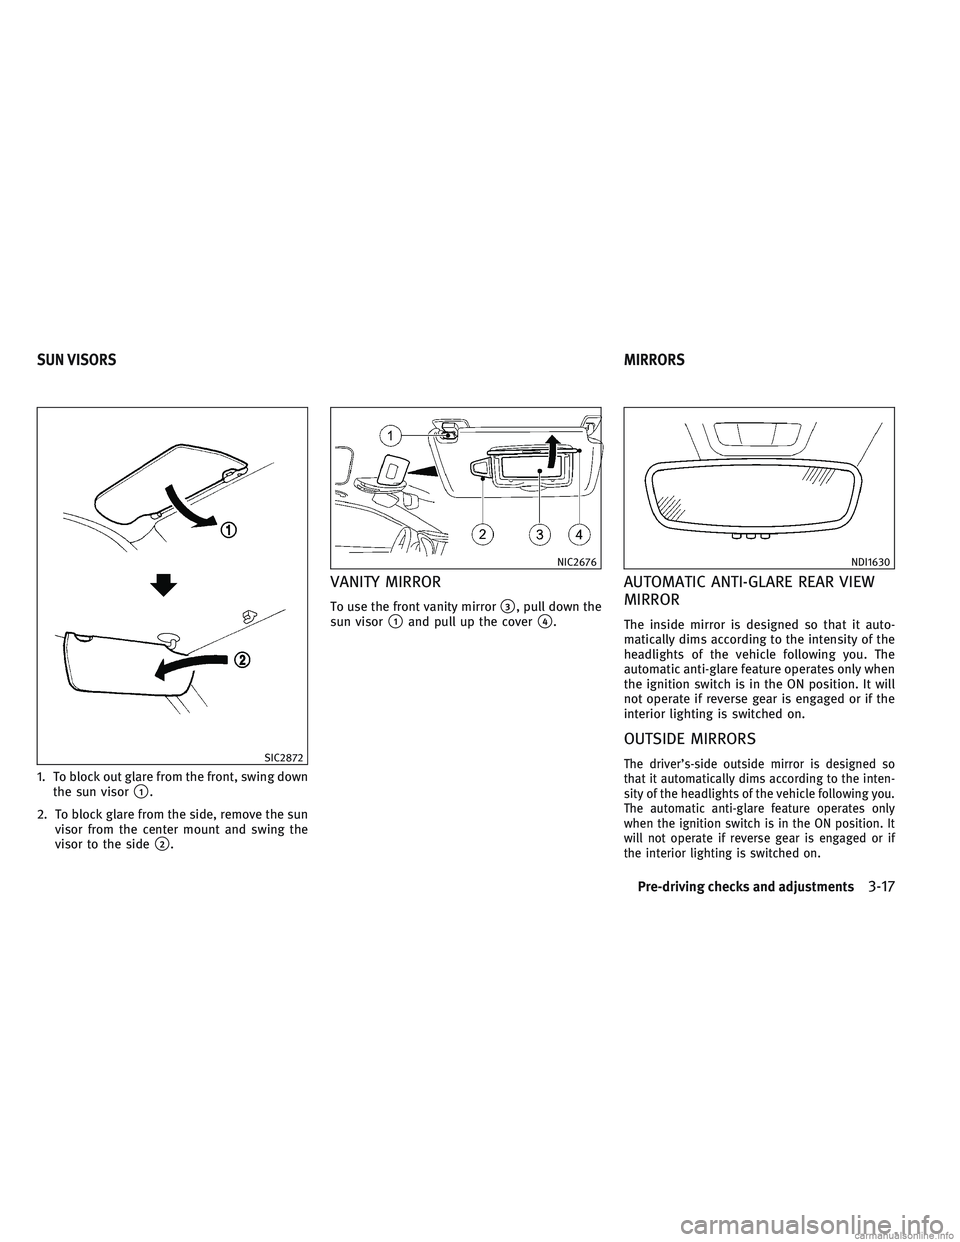 INFINITI QX30 2017  Owners Manual 1. To block out glare from the front, swing downthe sun visor
1.
2. To block glare from the side, remove the sun visor from the center mount and swing the
visor to the side
2.
VANITY MIRROR
To use t